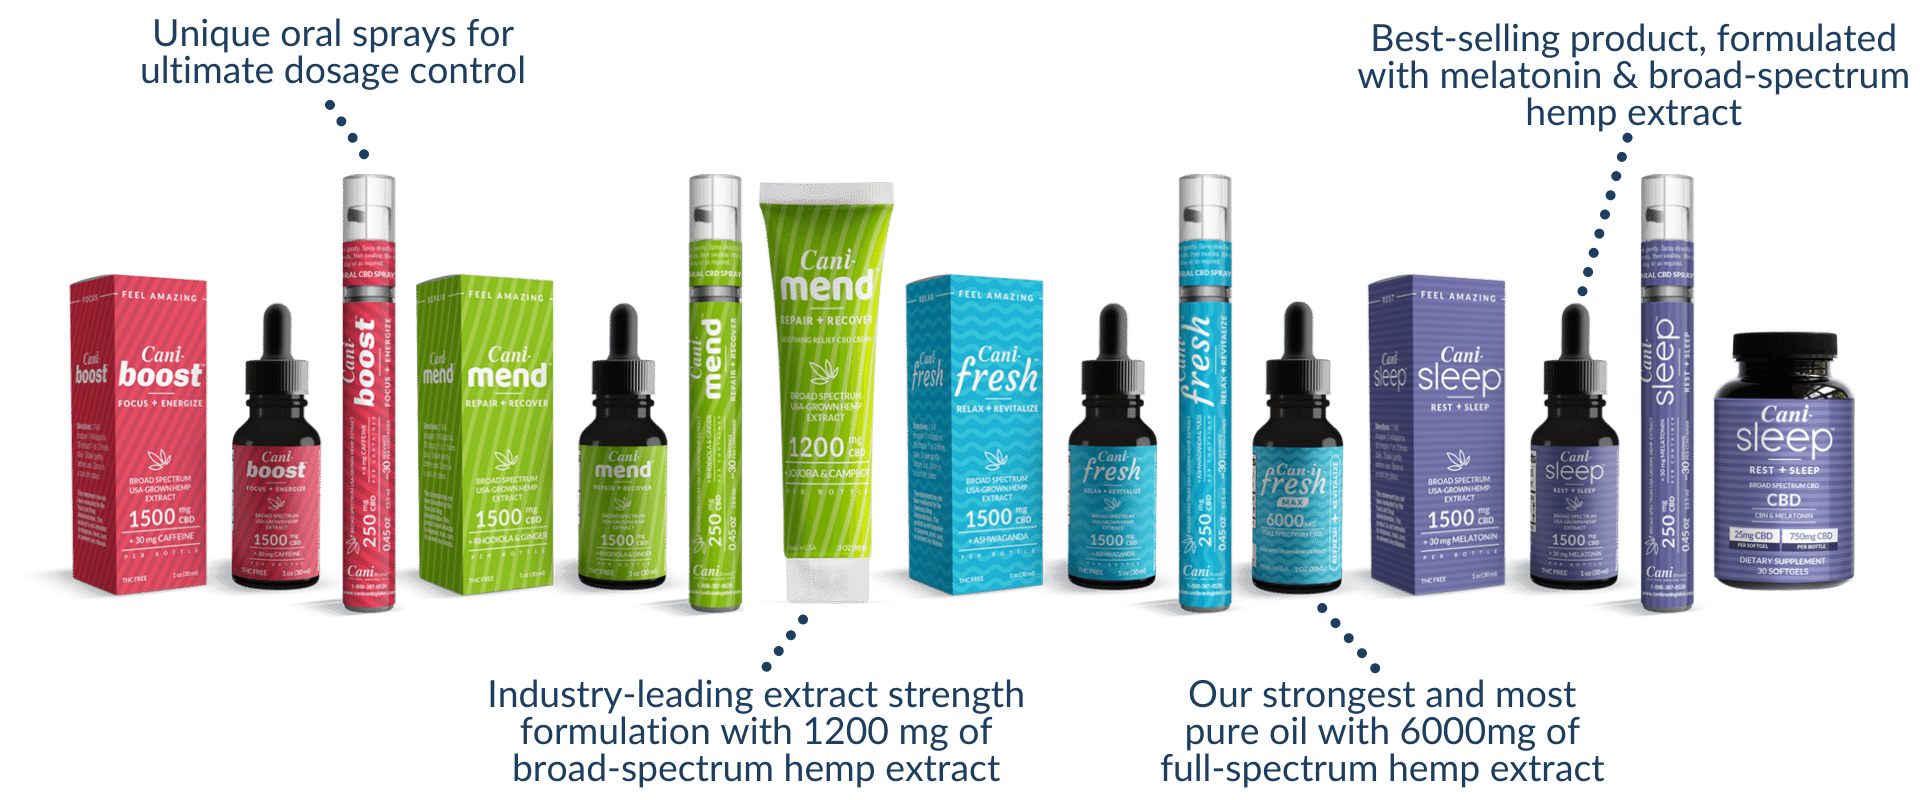 CBD oil for sleep plus the full suite of CaniBrands products